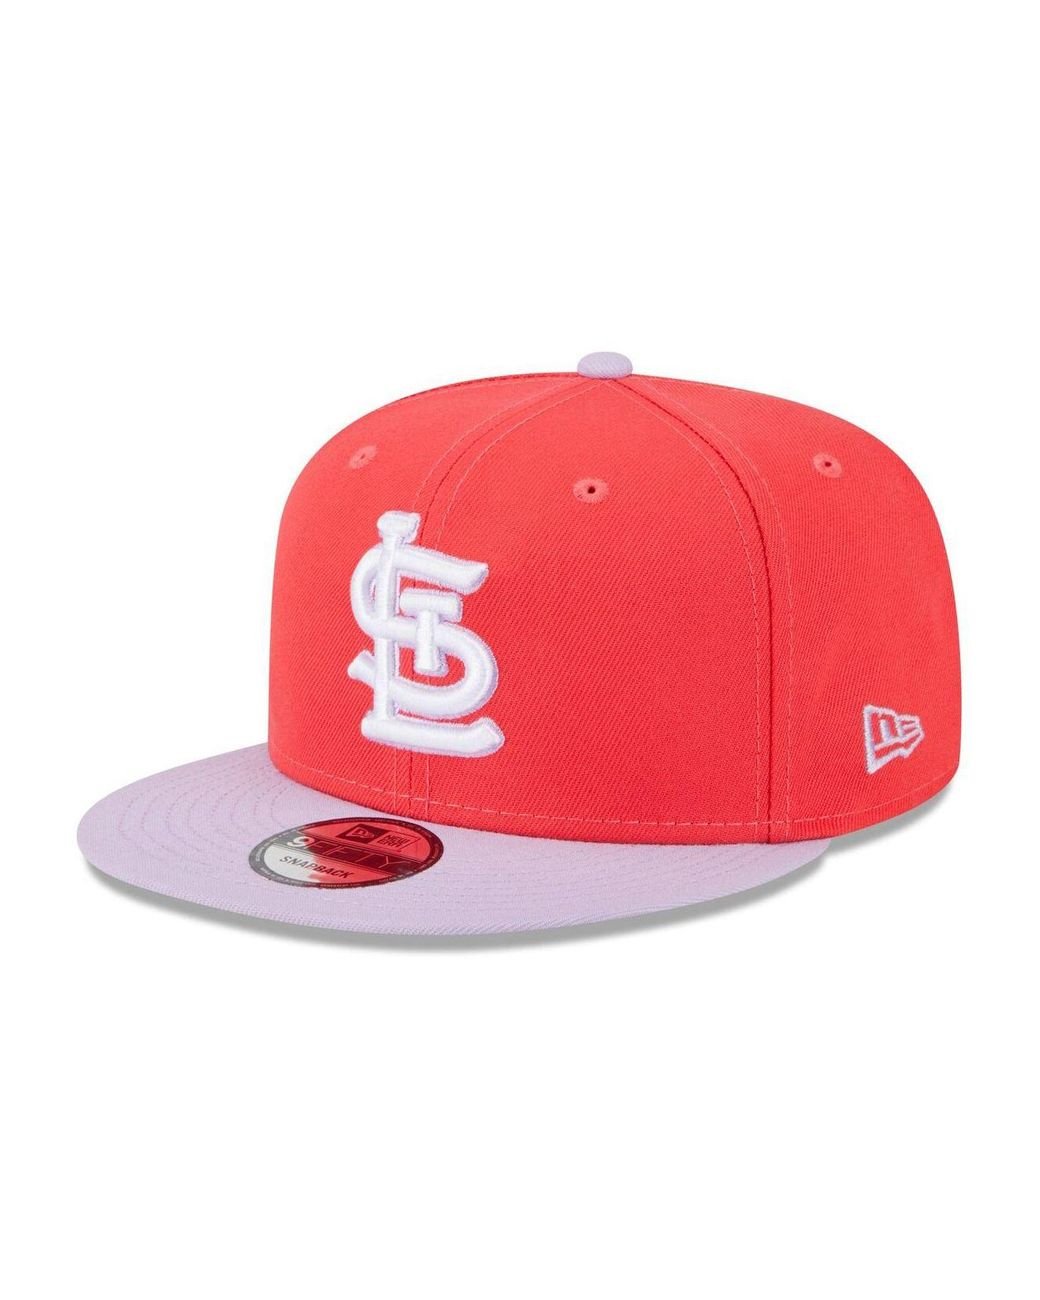 Lids St. Louis Cardinals New Era Spring Basic Two-Tone 9FIFTY Snapback Hat  - Red/Purple